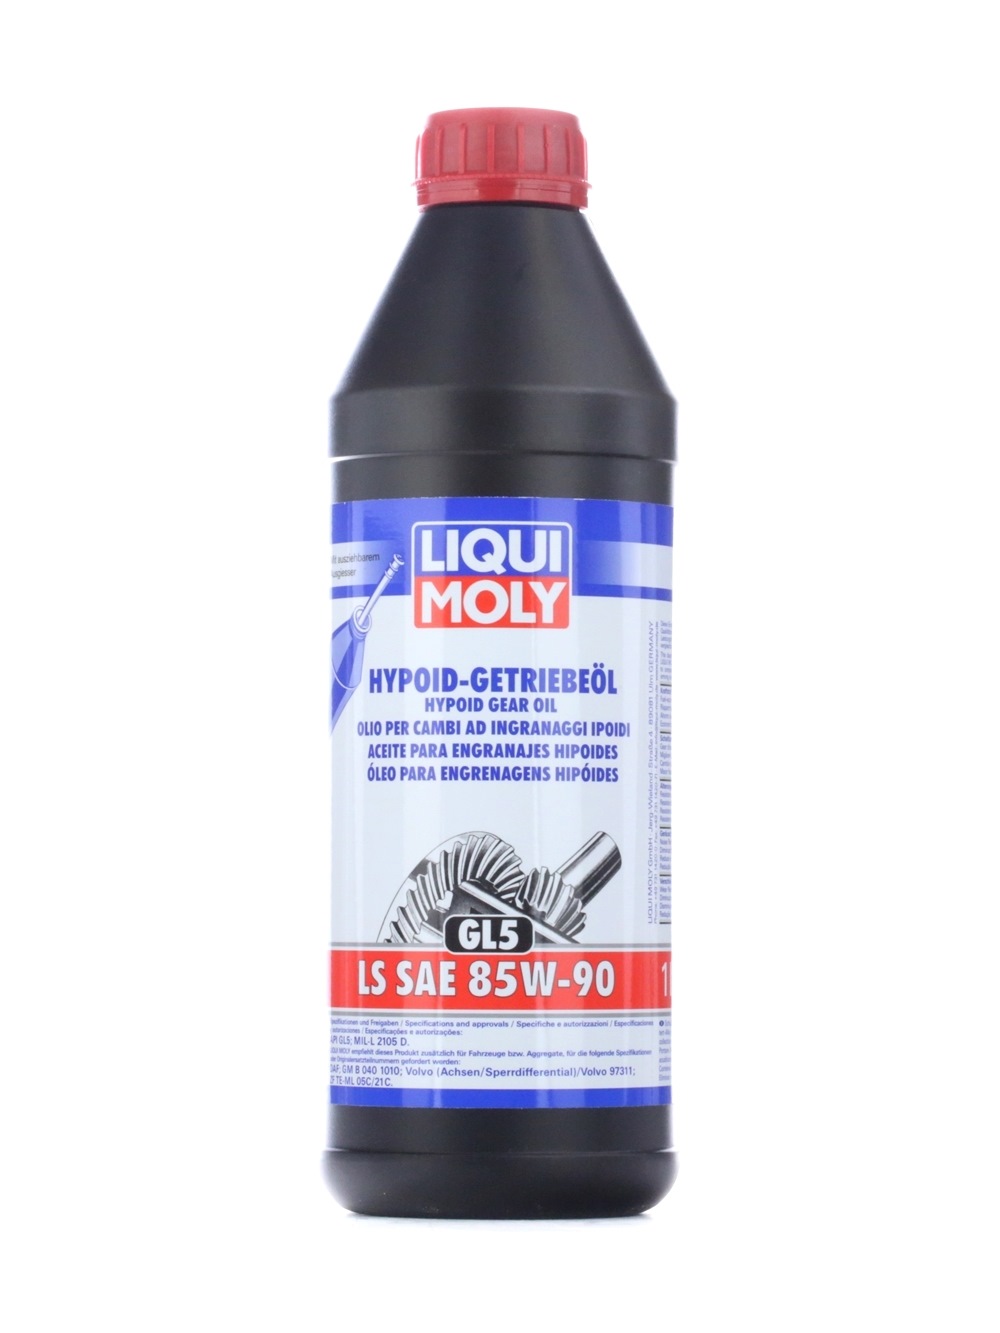 Propshafts and differentials parts - Axle Gear Oil LIQUI MOLY 1410